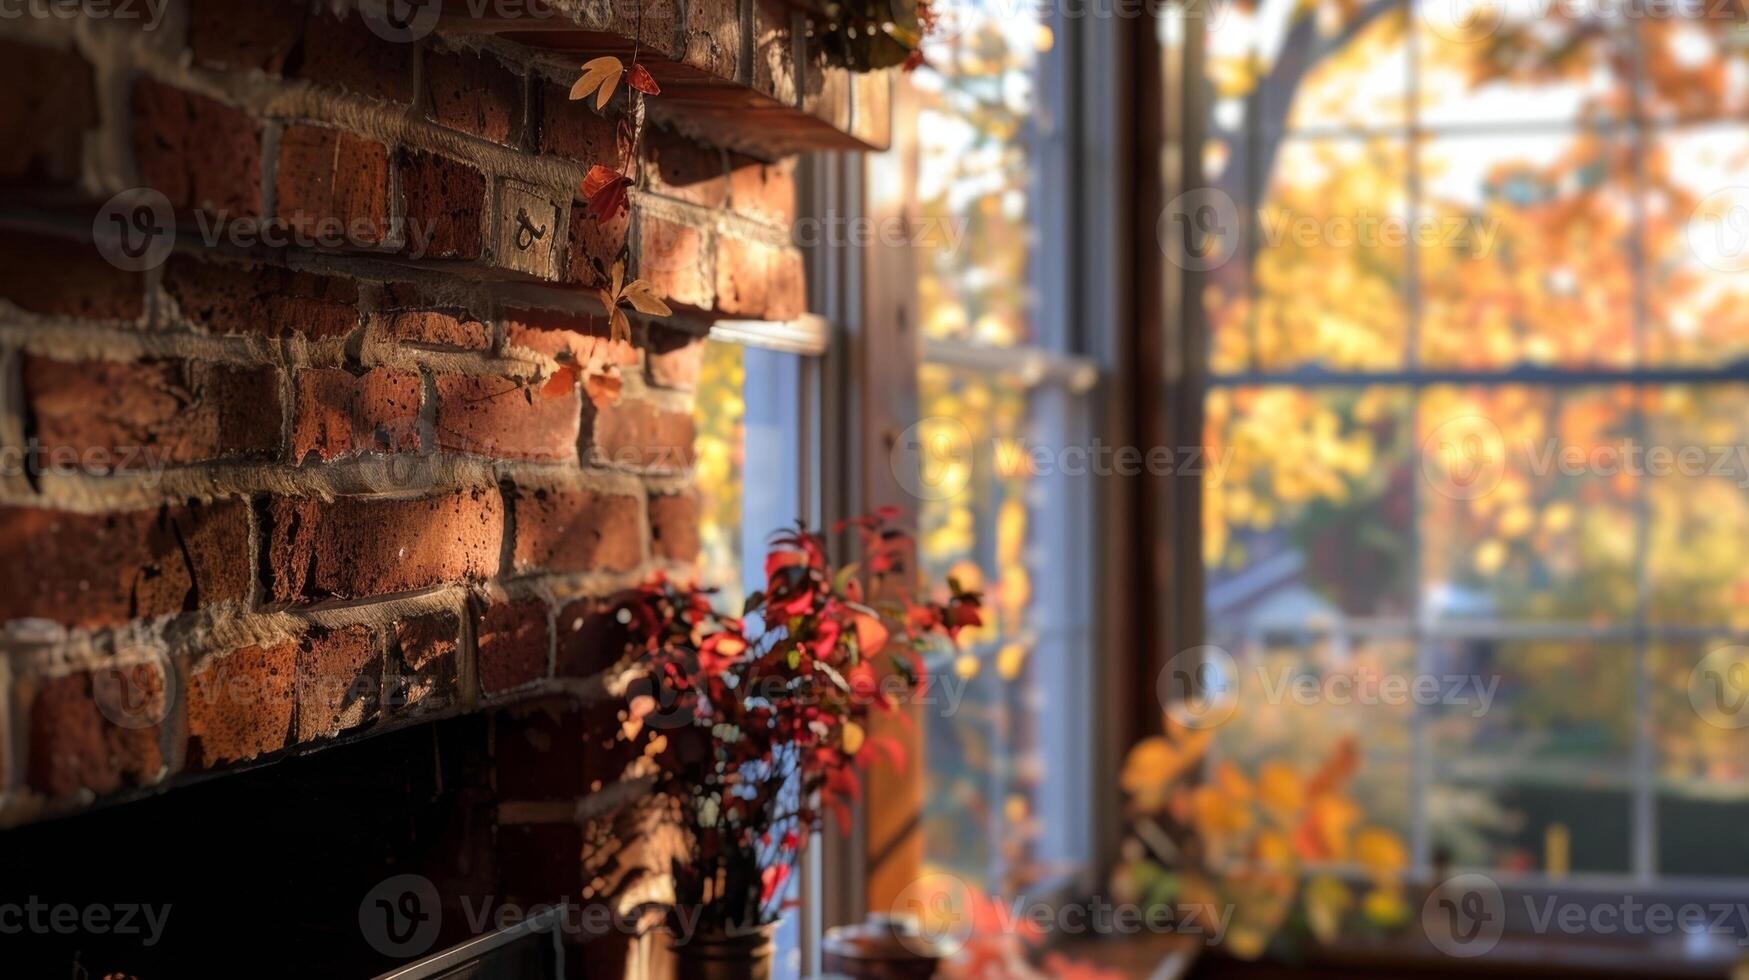 The traditional brick fireplace radiates warmth as you take in the changing colors of the autumn leaves through the nearby windows. 2d flat cartoon photo